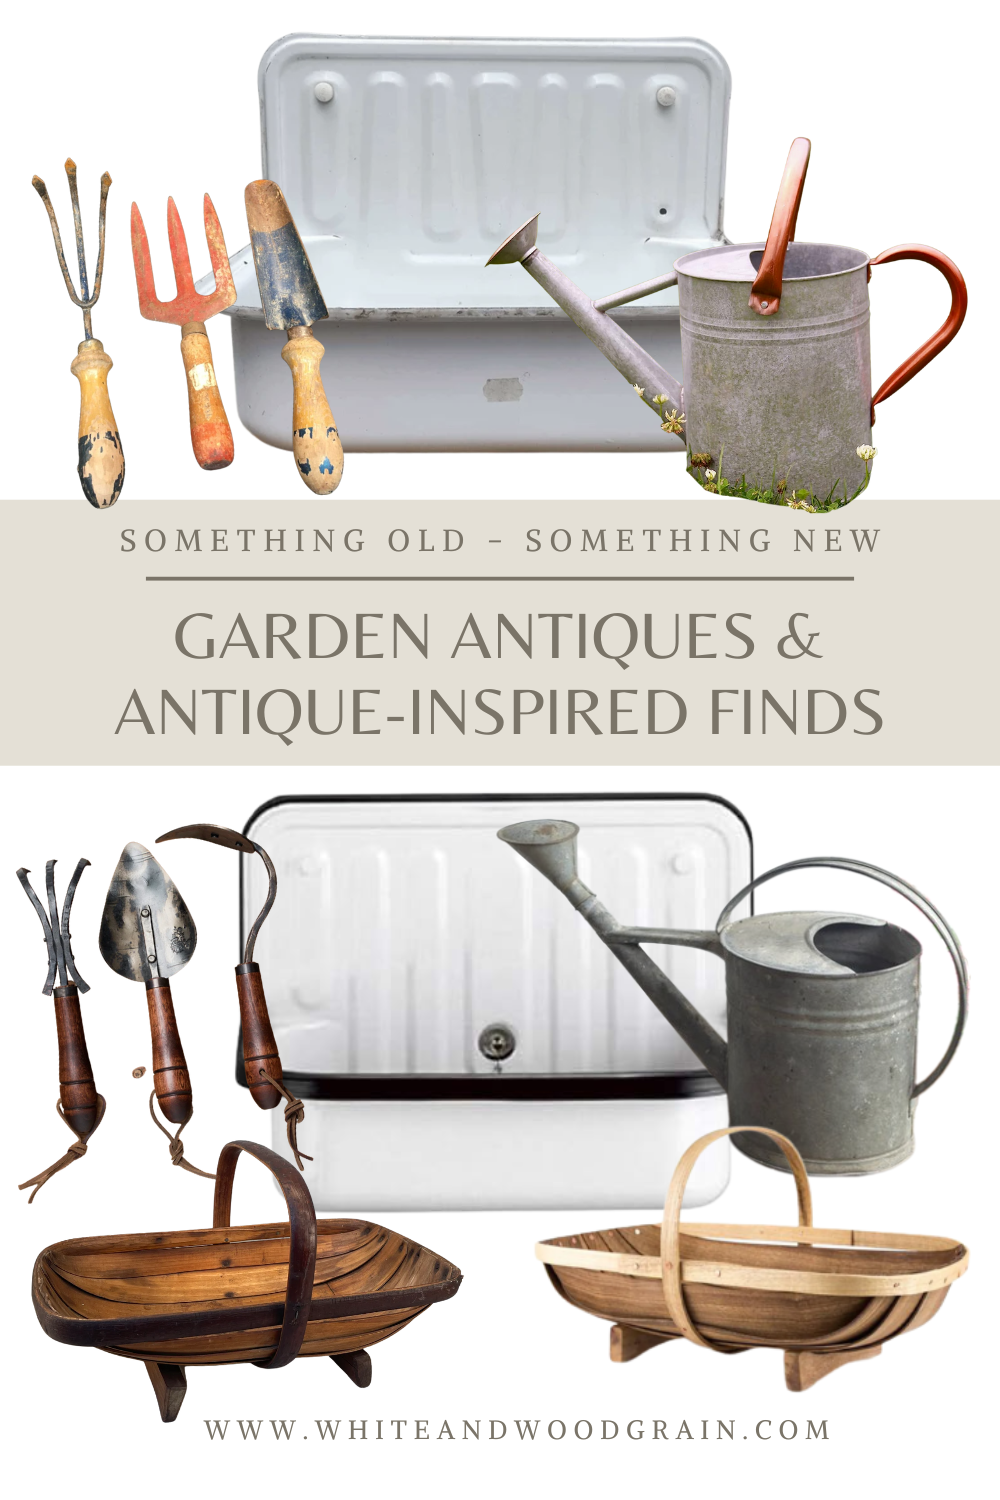 Something Old, Something New: Garden Antiques and Antique-Inspired Gardening Finds